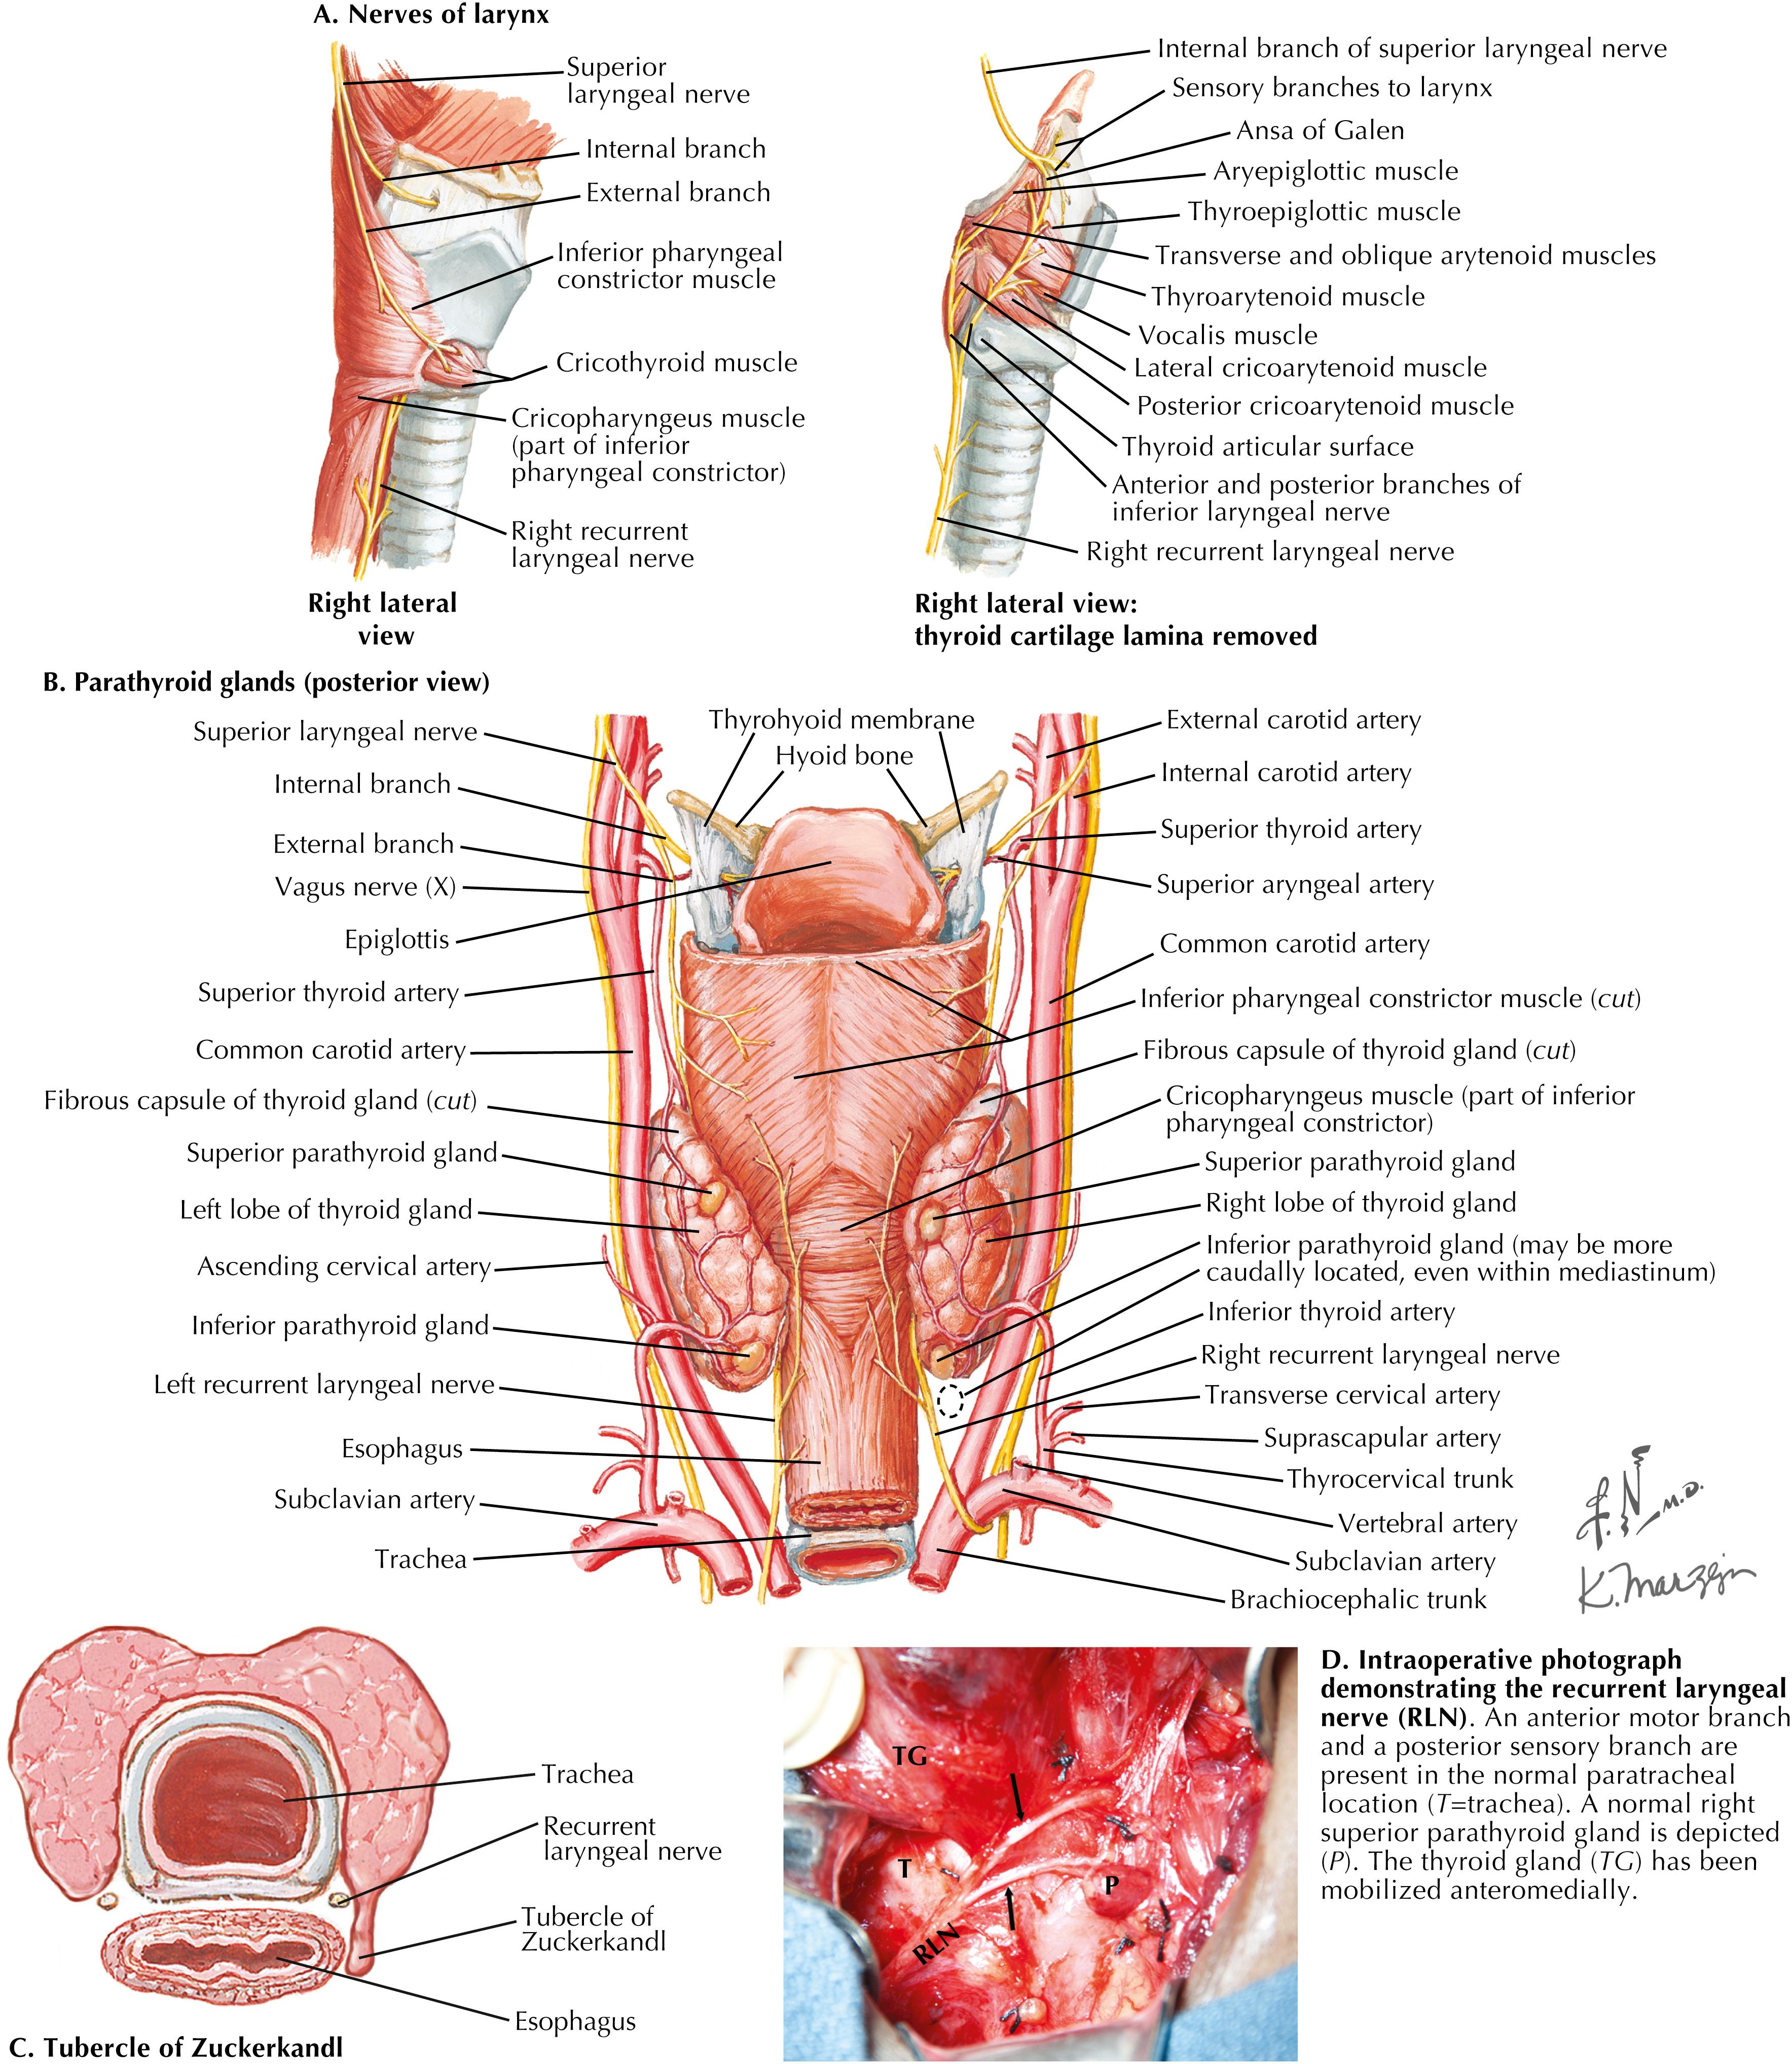 FIGURE 3.2, Anatomy of superior and recurrent laryngeal nerves.